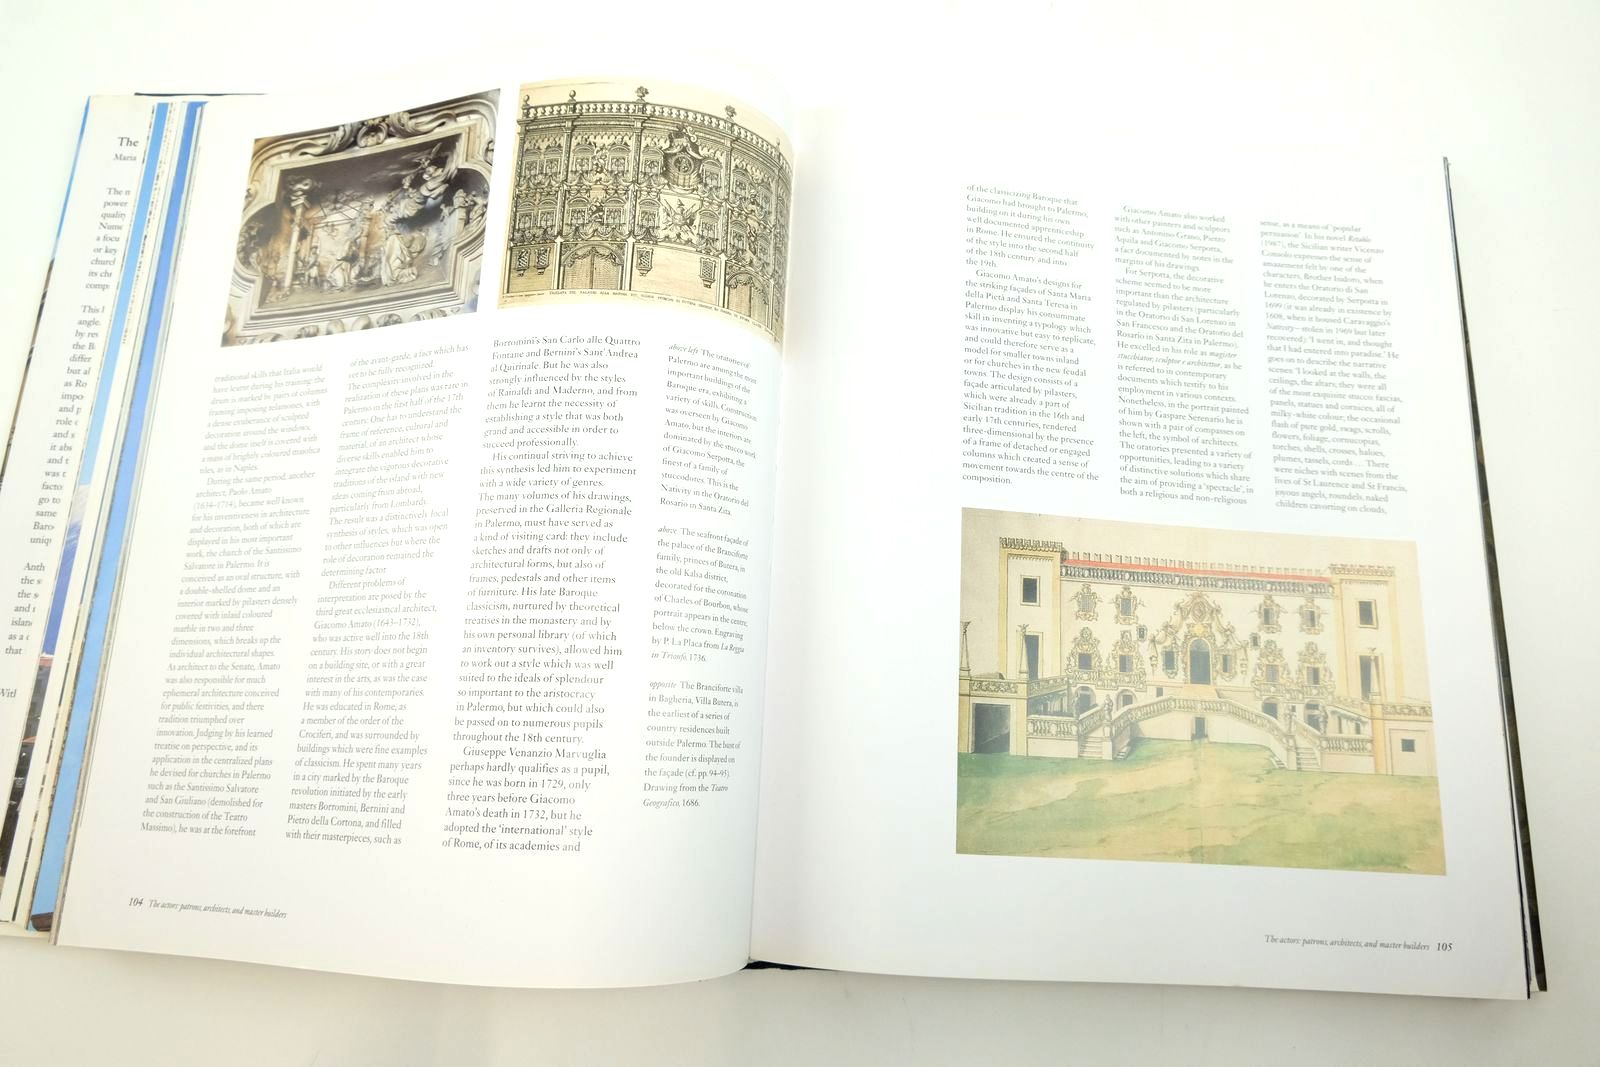 Photo of THE BAROQUE ARCHITECTURE OF SICILY written by Giuffre, Maria published by Thames and Hudson (STOCK CODE: 2139022)  for sale by Stella & Rose's Books